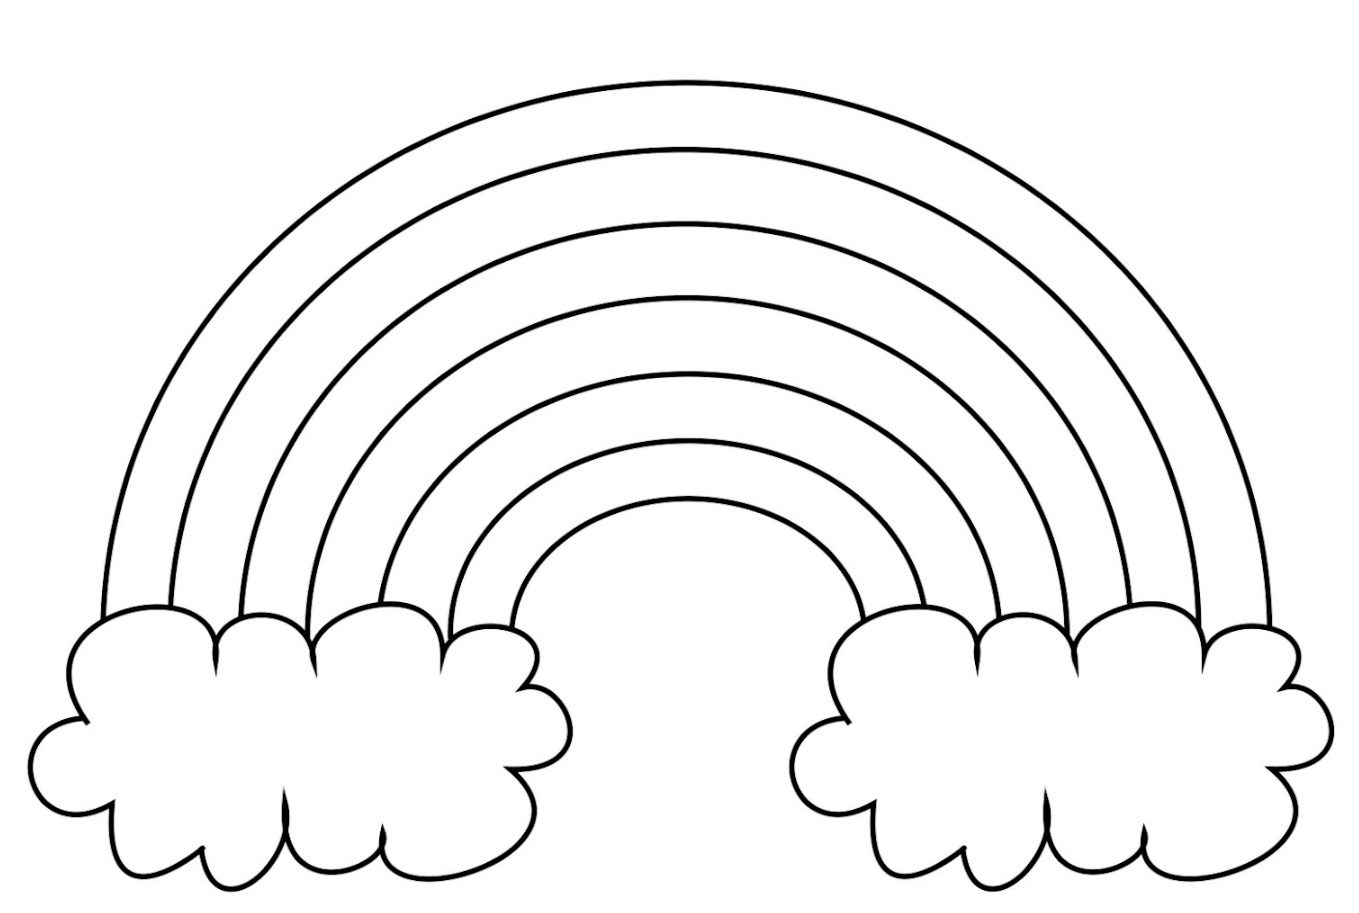 Simple Rainbow Coloring Page